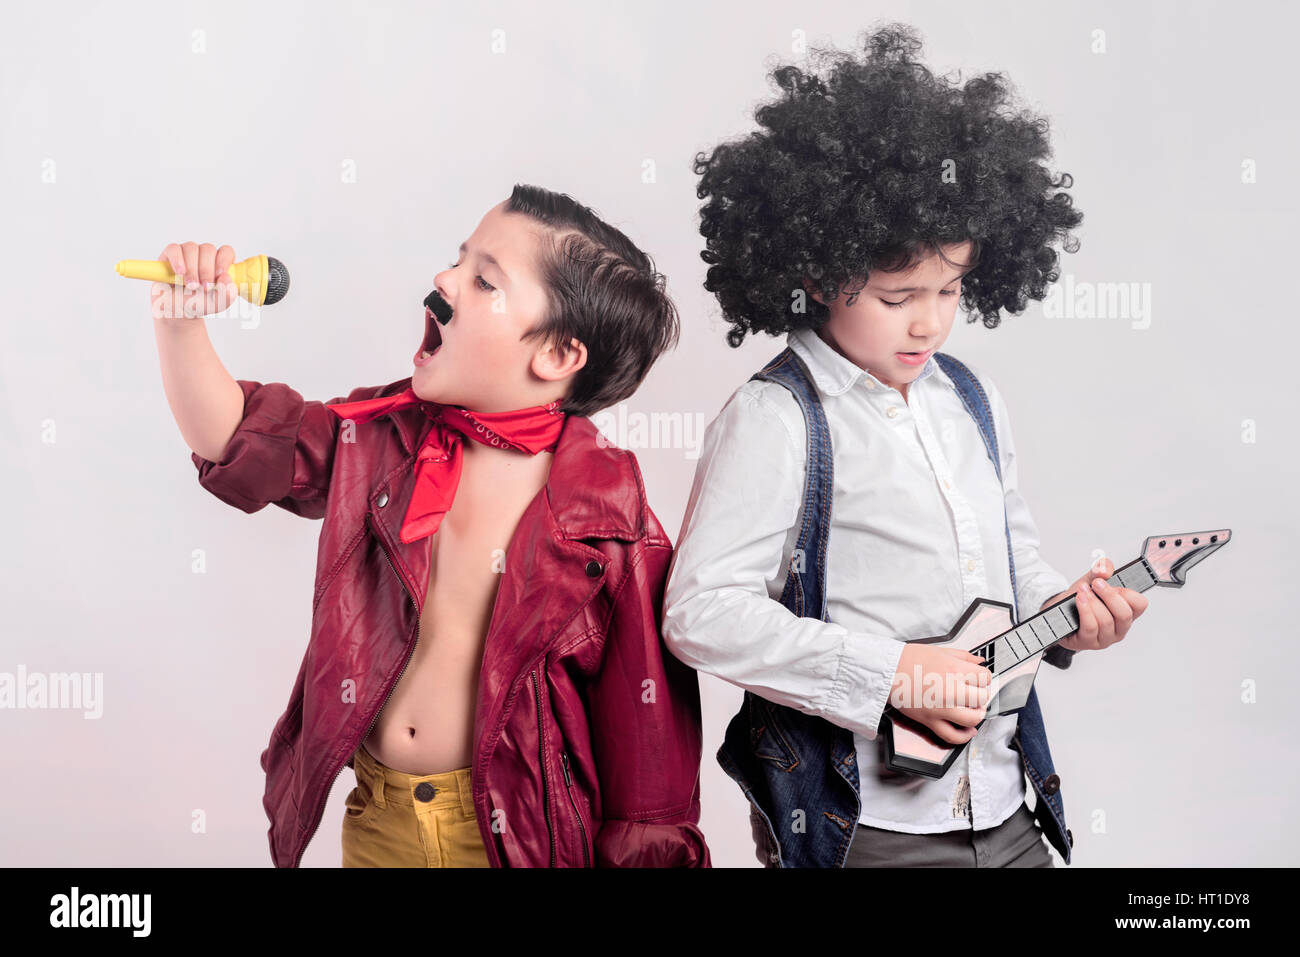 like a rock star,  Children disguised as rock stars Stock Photo